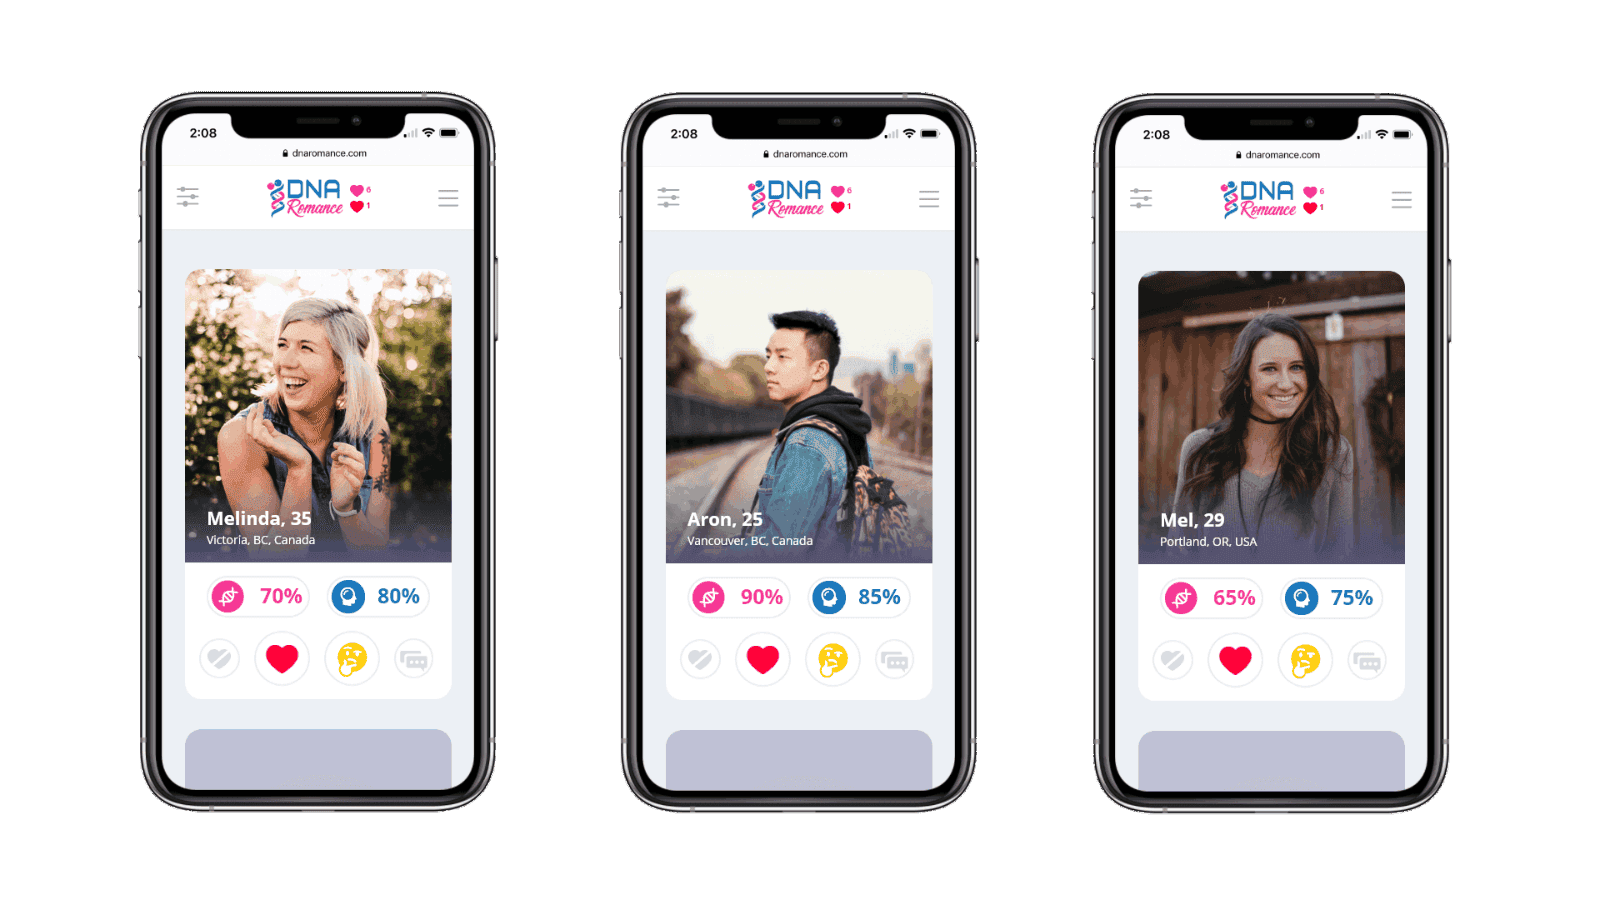 Three phones showing dating app interface, each with a different match